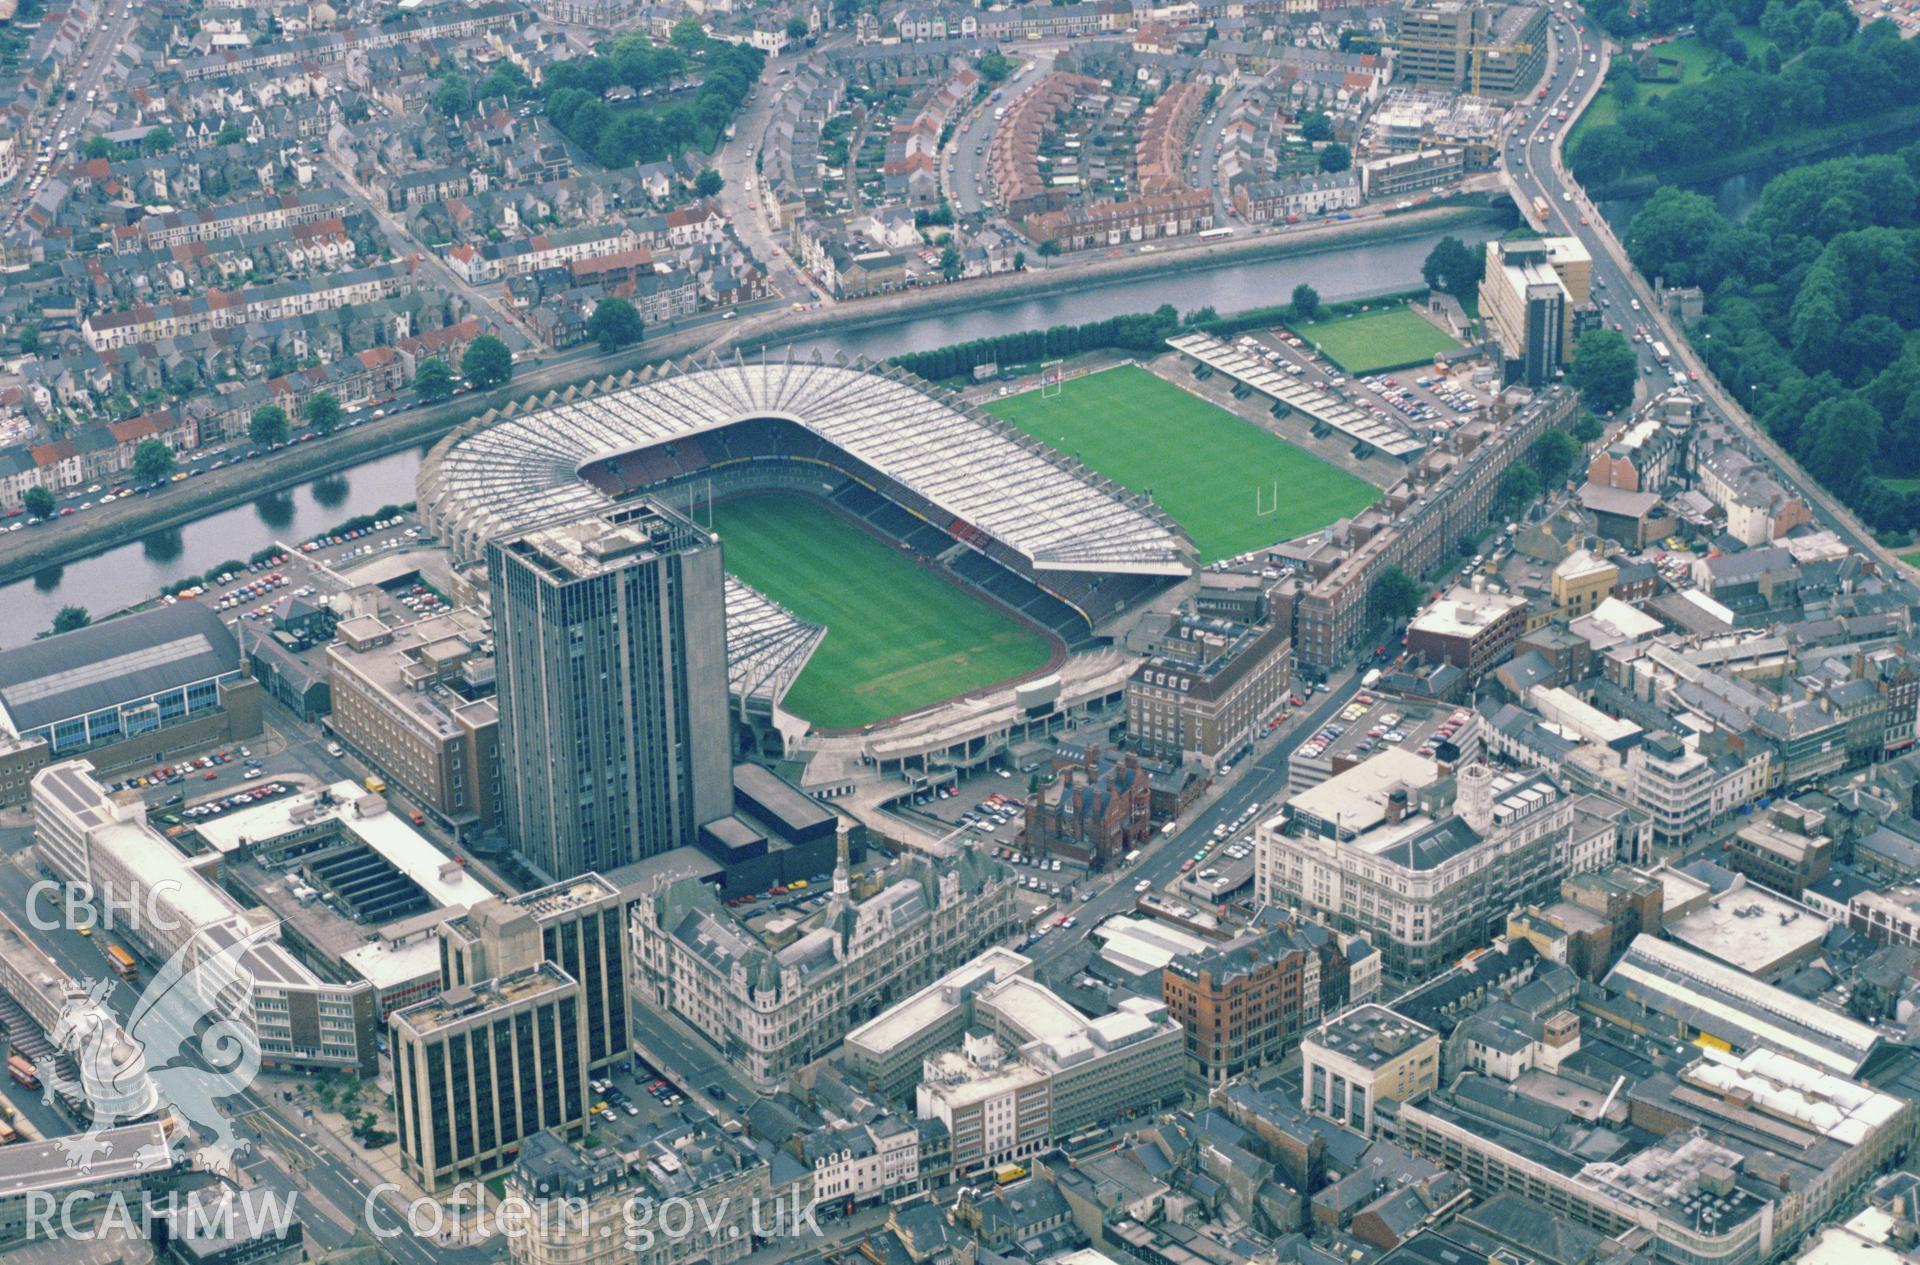 RCAHMW colour slide oblique aerial photograph of Cardiff Arms Park, taken by CR Musson on 03/08/88